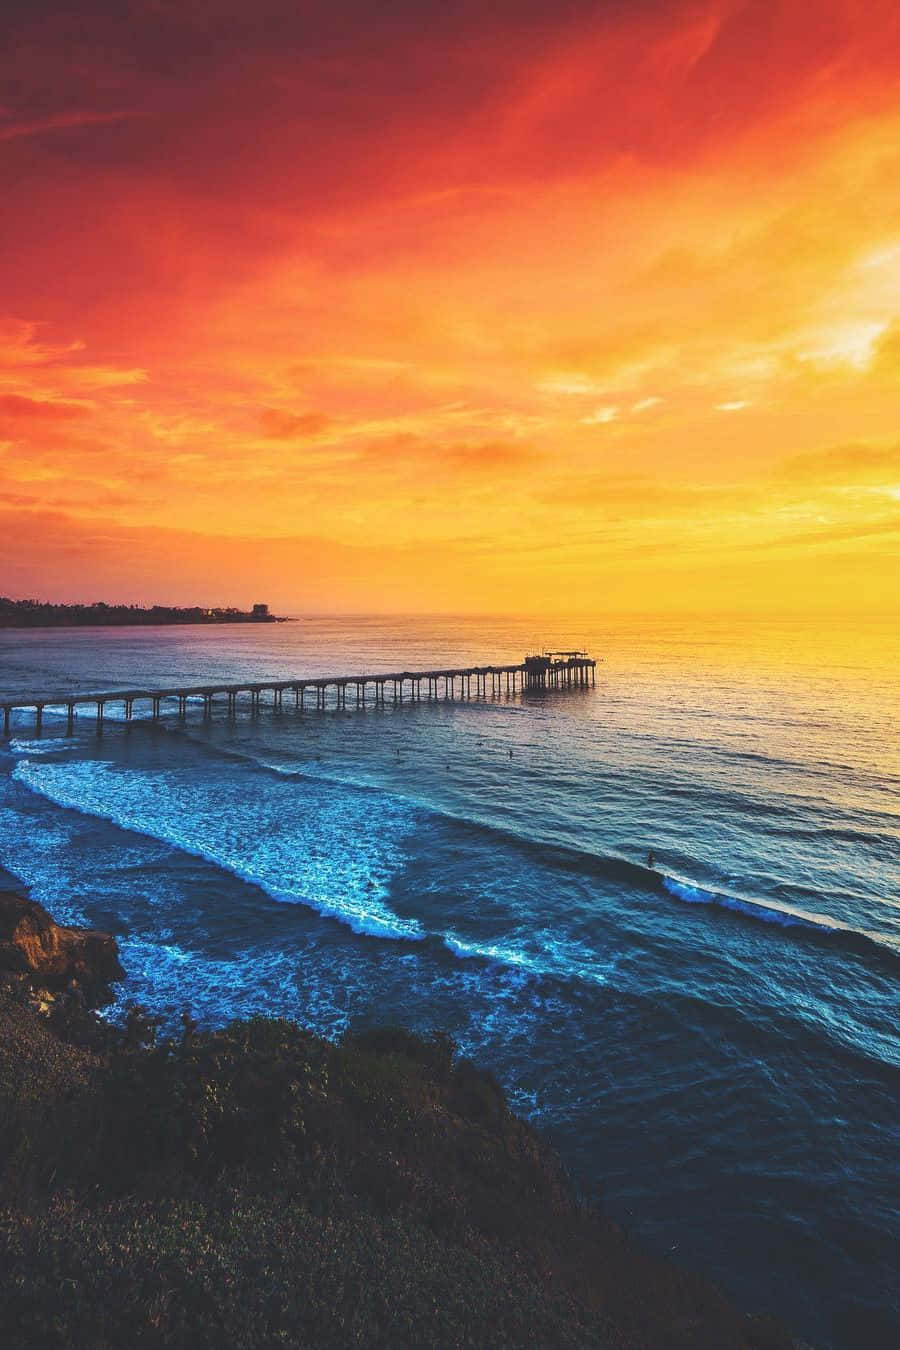 Watch the sunsets in San Diego with your iPhone Wallpaper